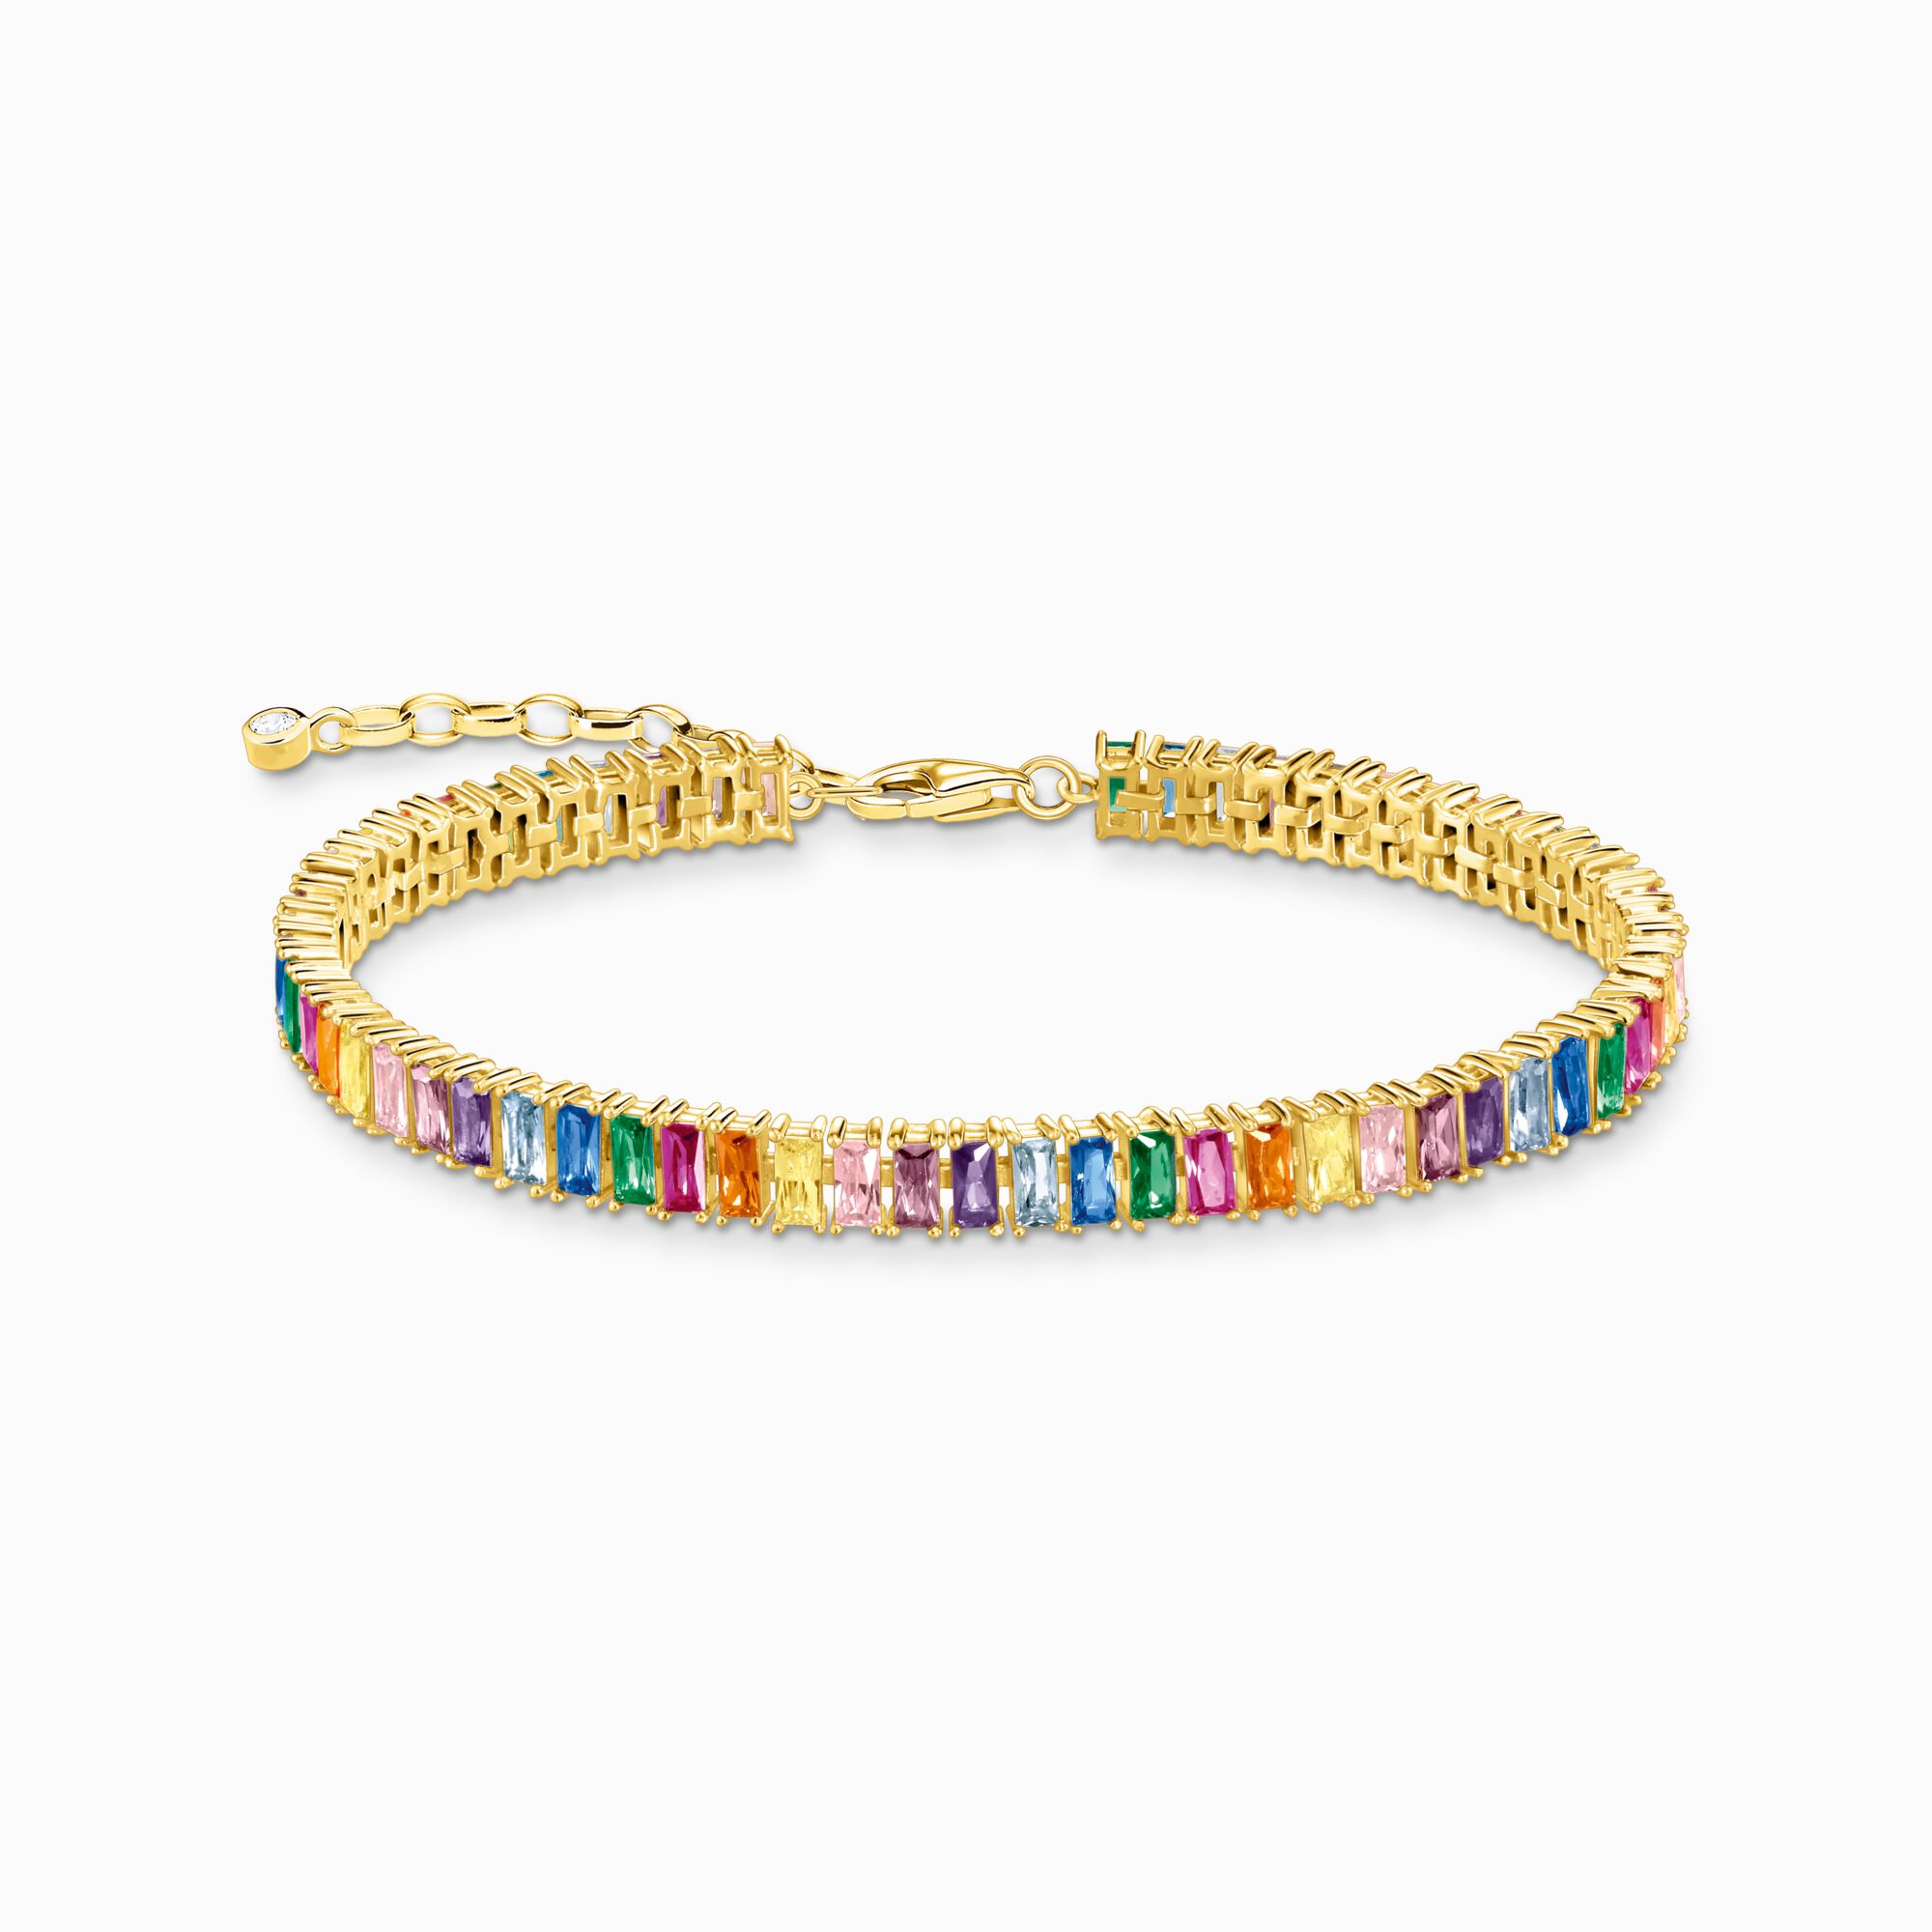 Tennis bracelet with colourful stones gold plated from the  collection in the THOMAS SABO online store